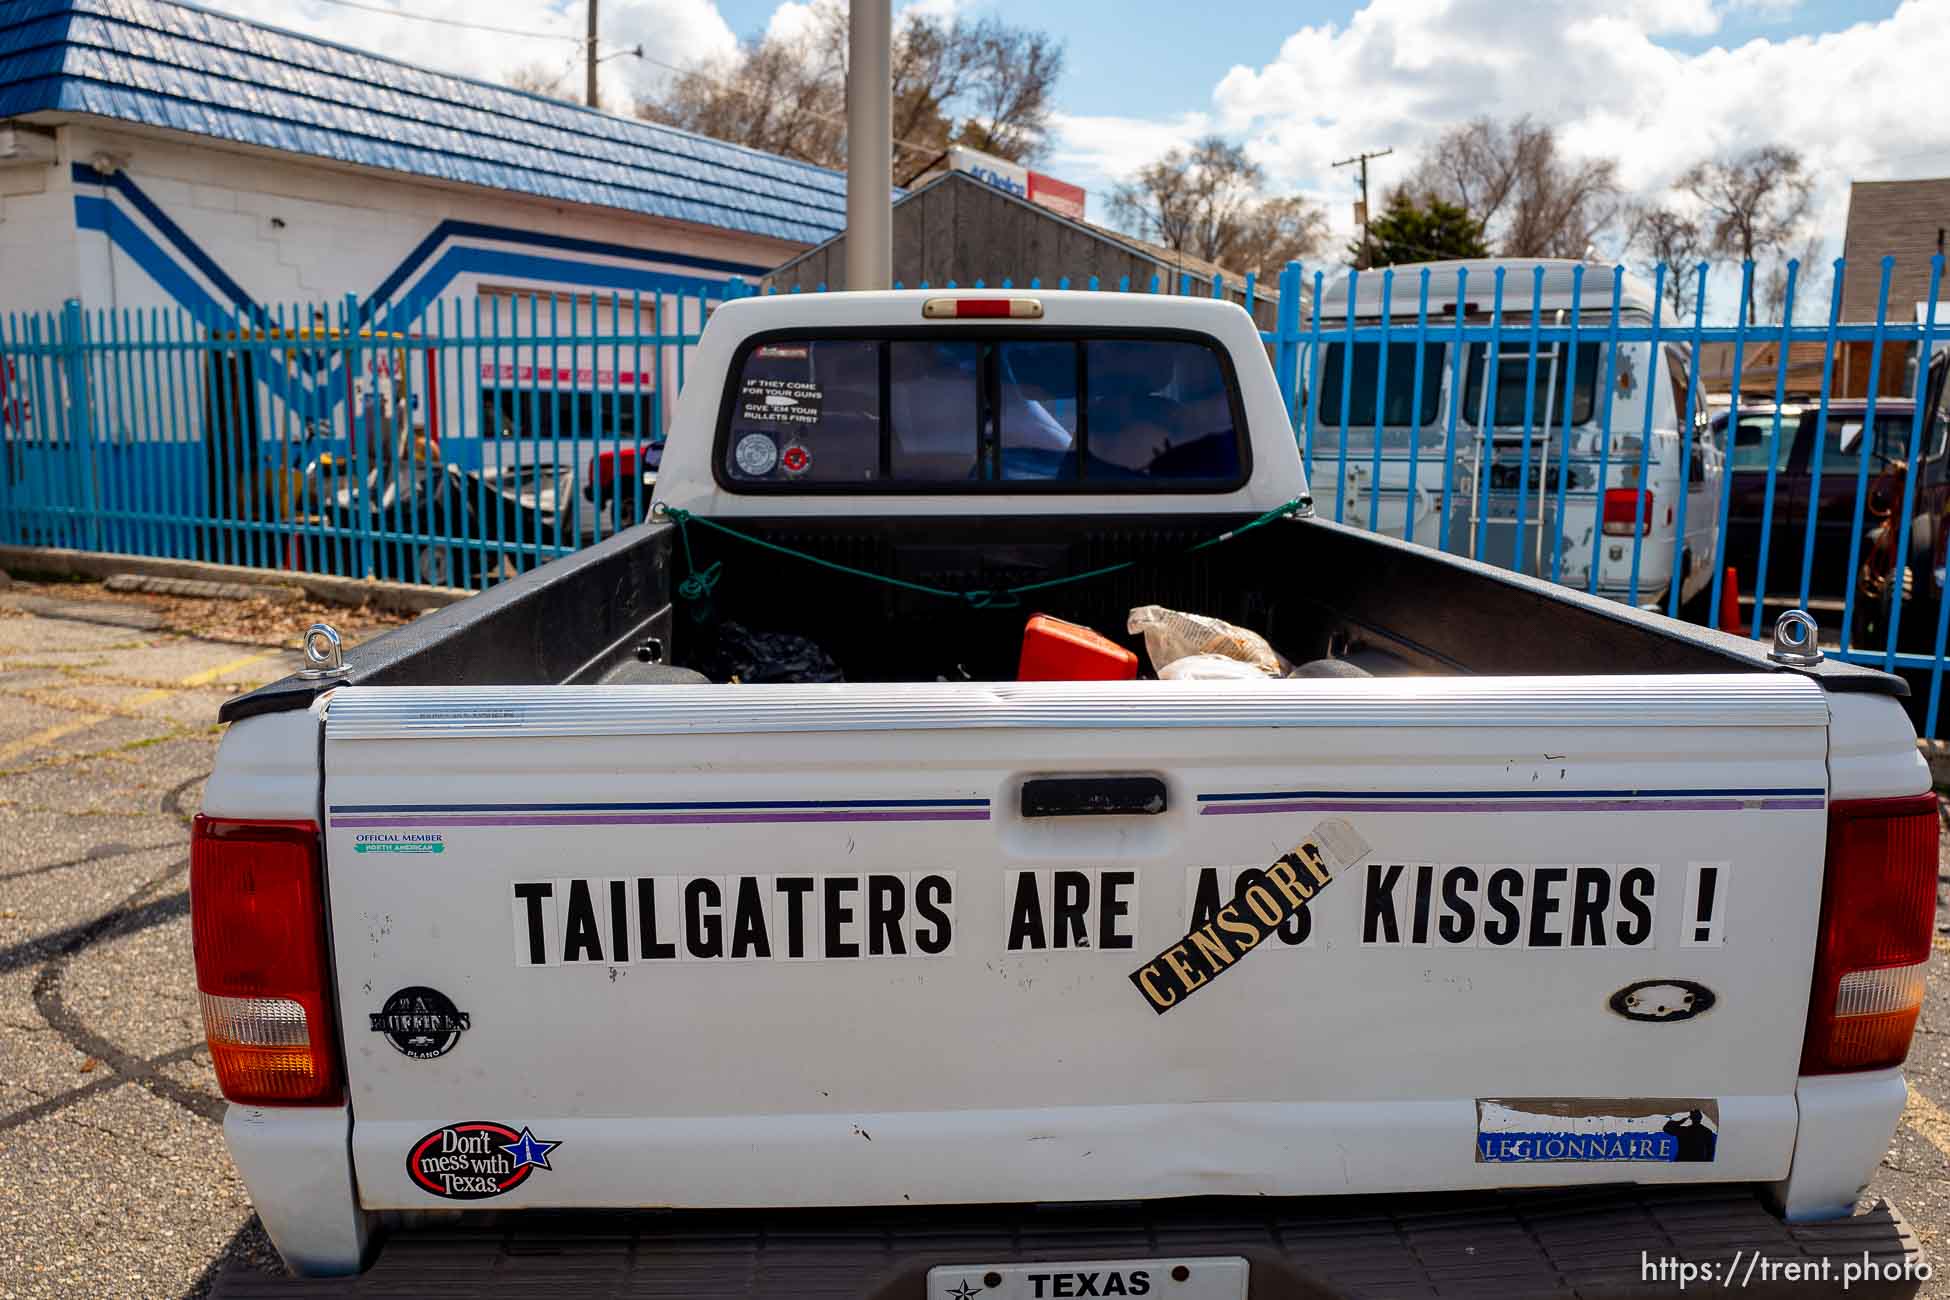 Tailgaters are ass kissers!